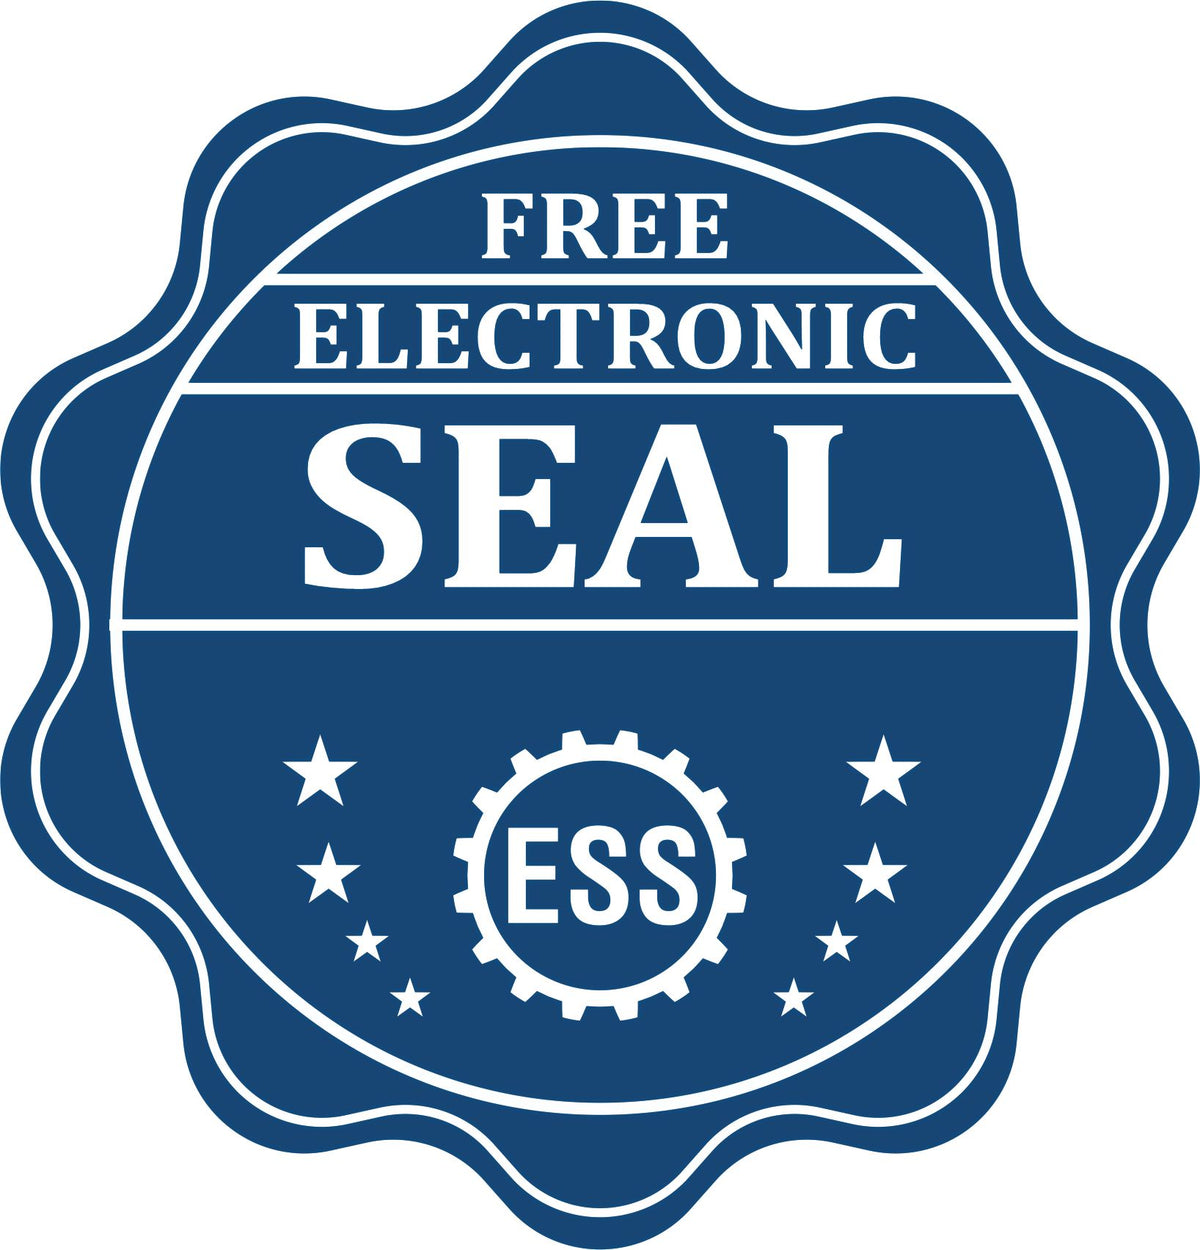 A badge showing a free electronic seal for the Iowa Desk Architect Embossing Seal with stars and the ESS gear on the emblem.